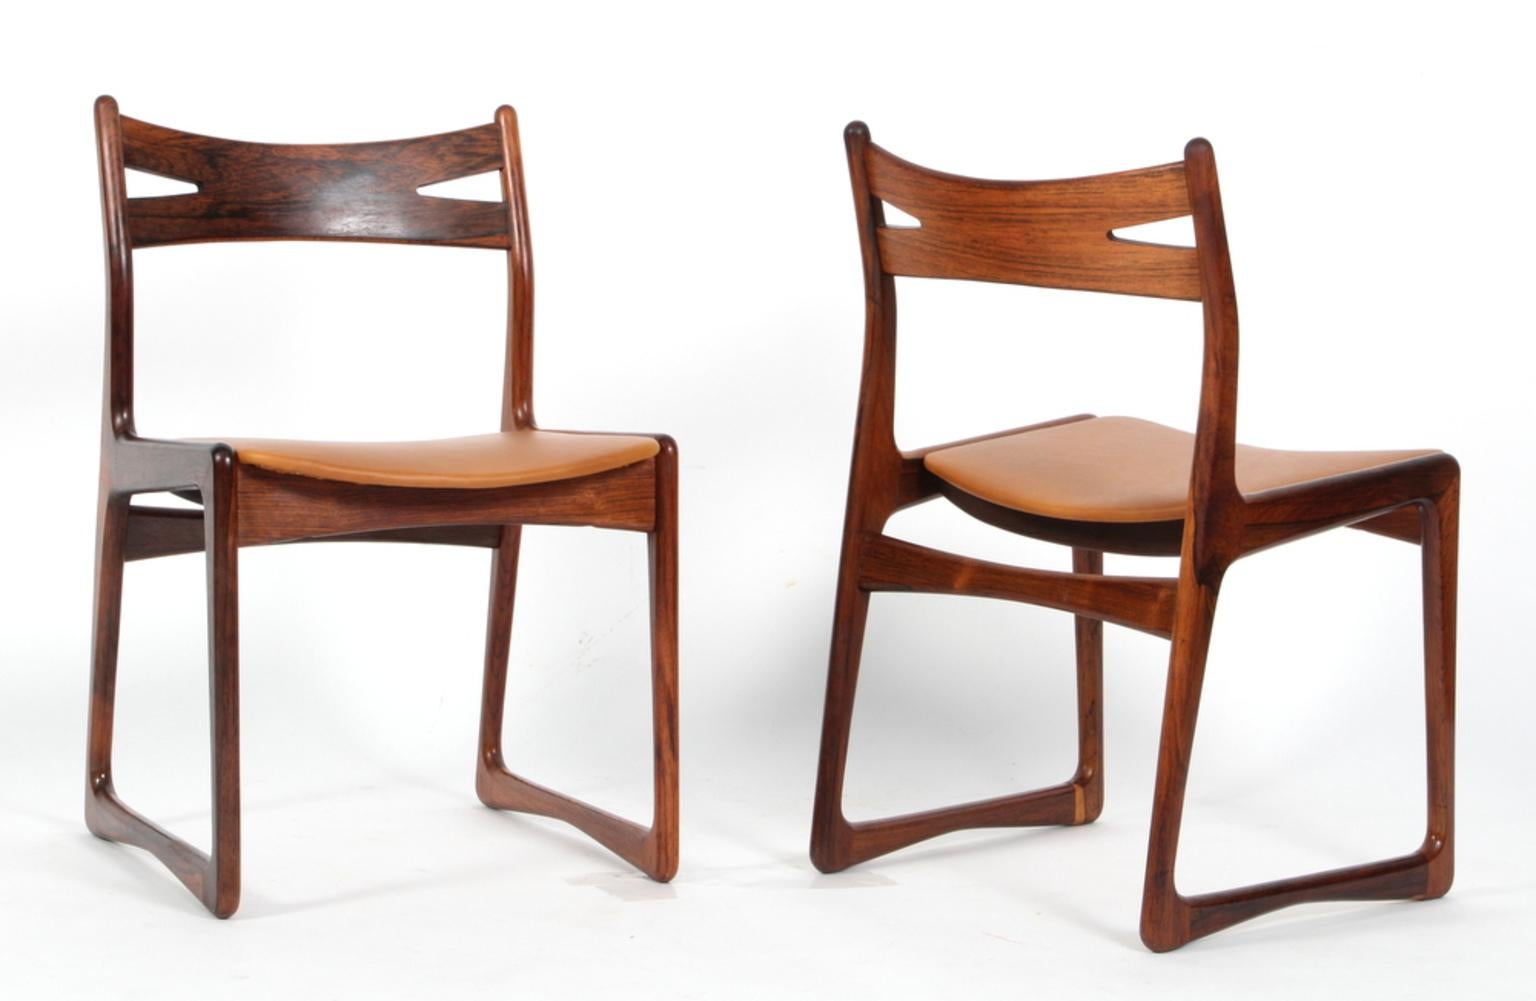 Danish cabinetmaker set of ten dining chairs new upholstered with silk aniline leather.

Frame of partly massive rosewood.

Backrest in style of Hans Wegner's Savbuk.